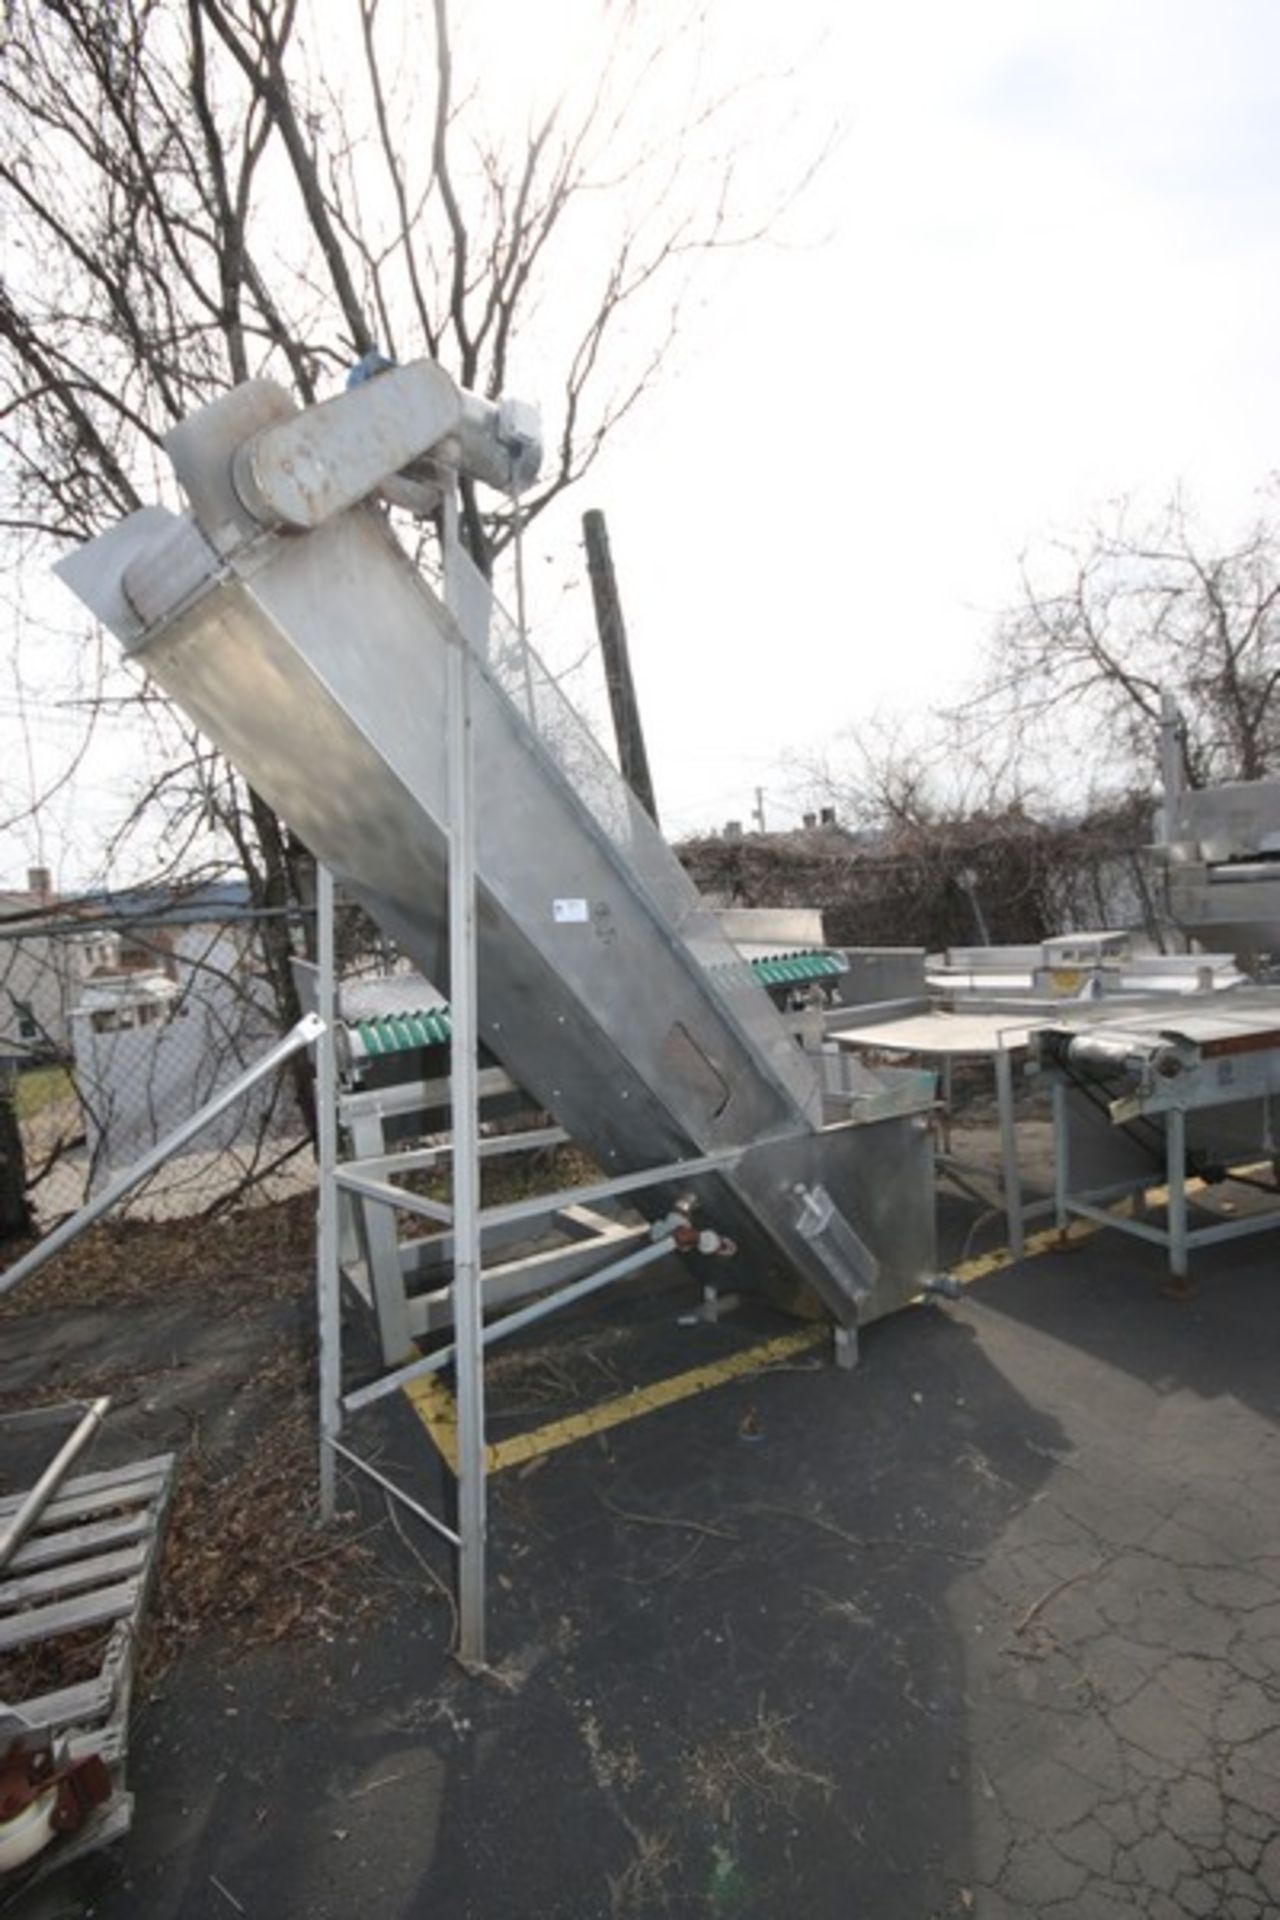 S/S Incline Cleated Conveyor,with S/S Clad Drive, Floor to Top of Conveyor Aprox. 7'3" H, Overall - Image 2 of 6